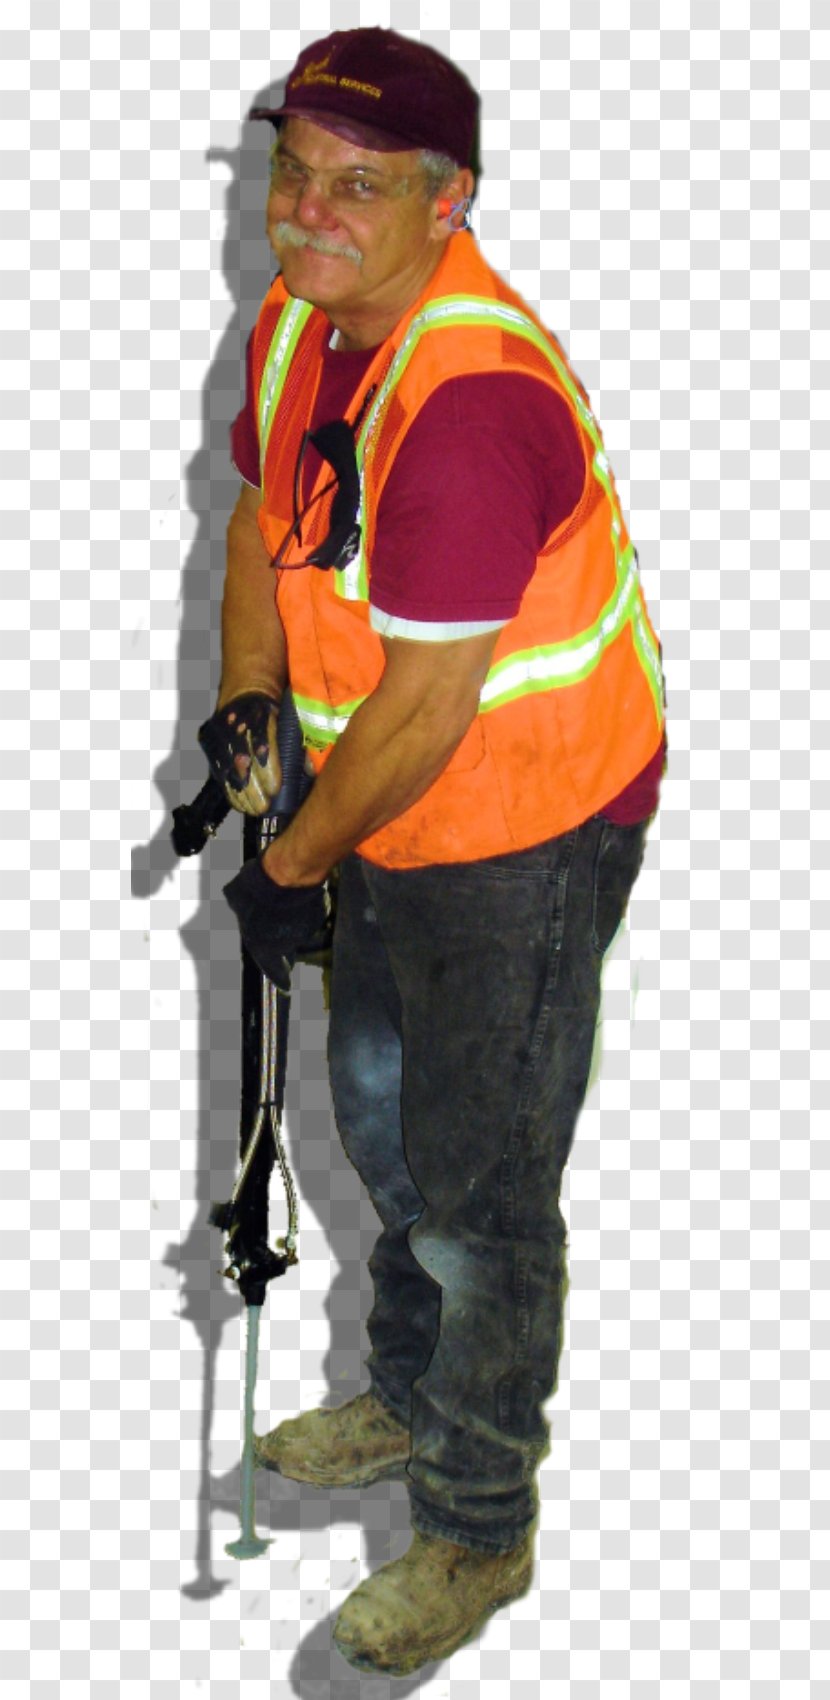 Laborer Construction Worker Climbing Harnesses Safety Harness - Undercover Boss Transparent PNG